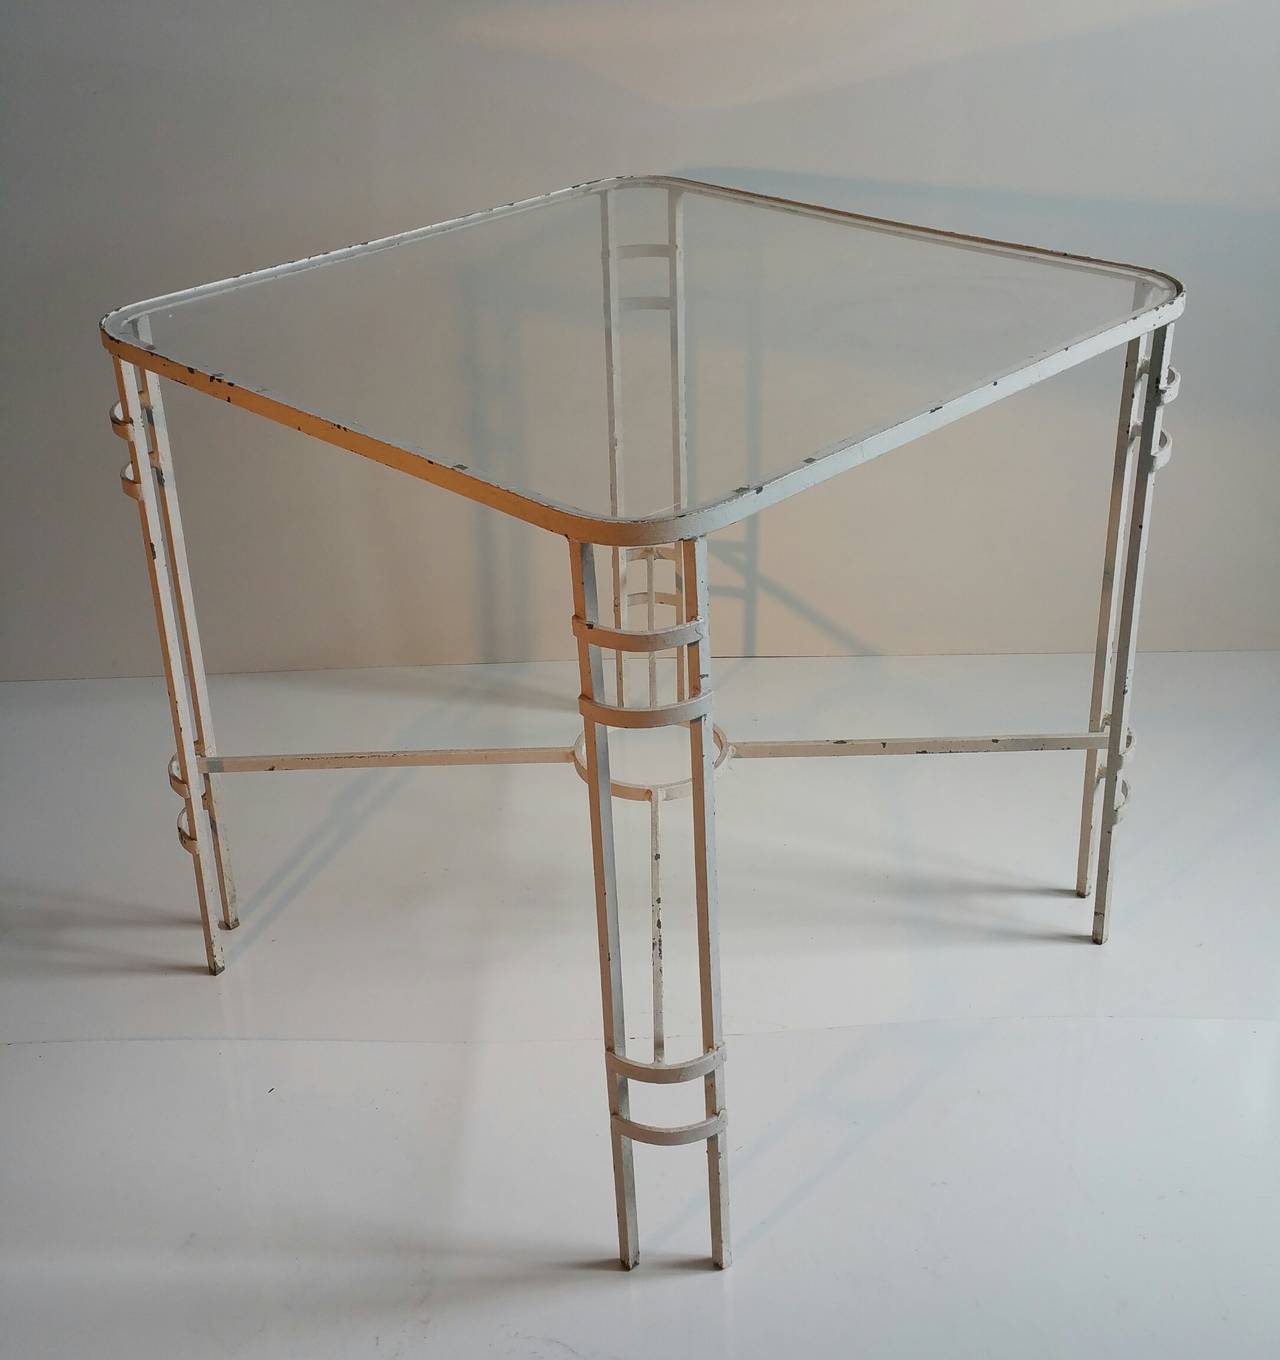 Welded Modernist French or German Wrought Iron Table For Sale